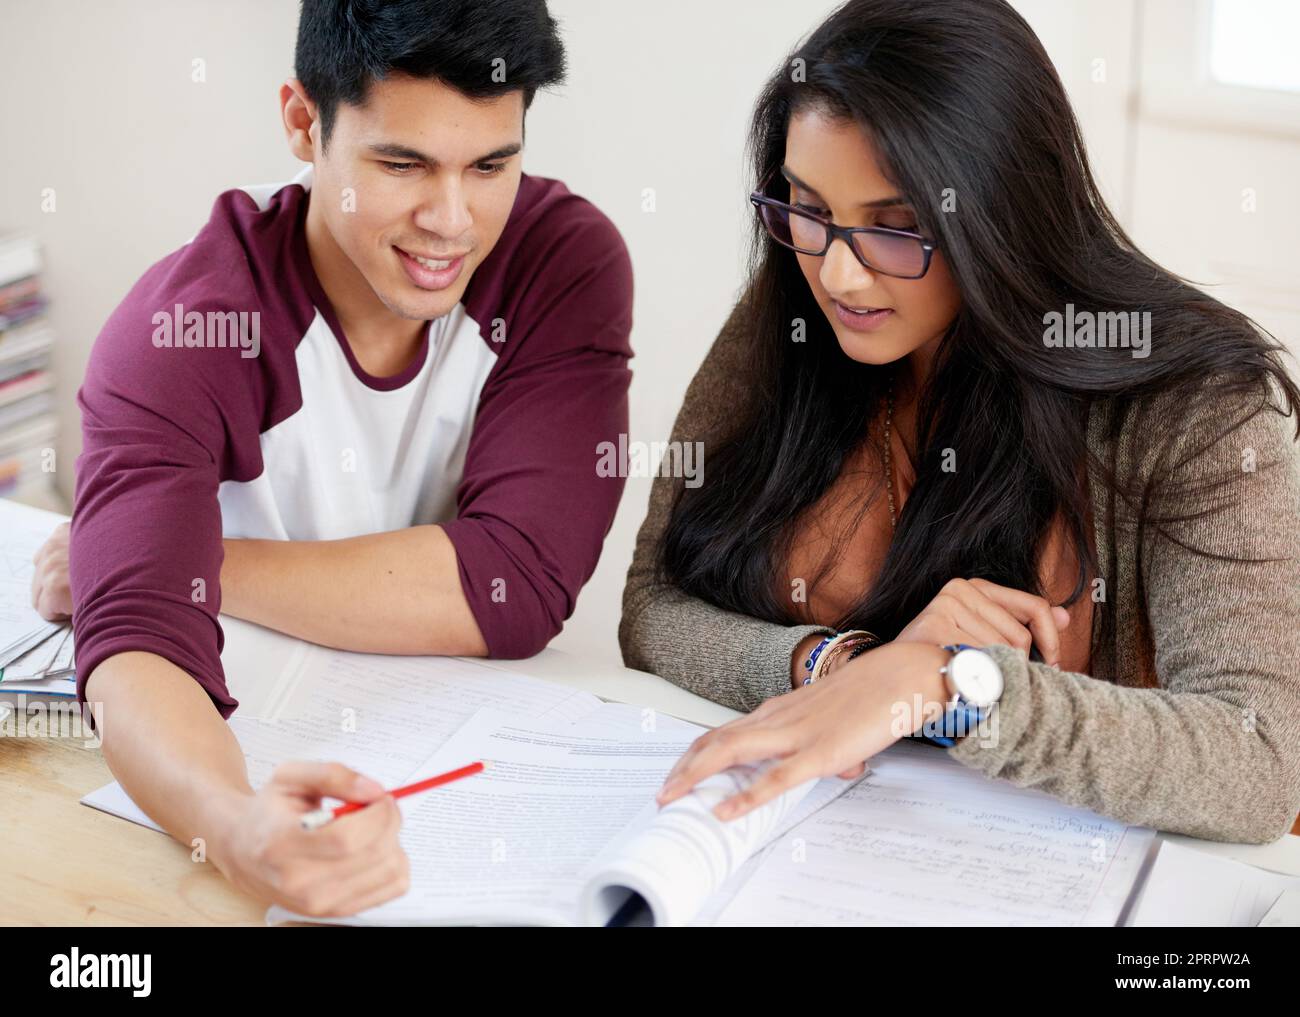 Helping her prep for the exams. two university students studying. Stock Photo